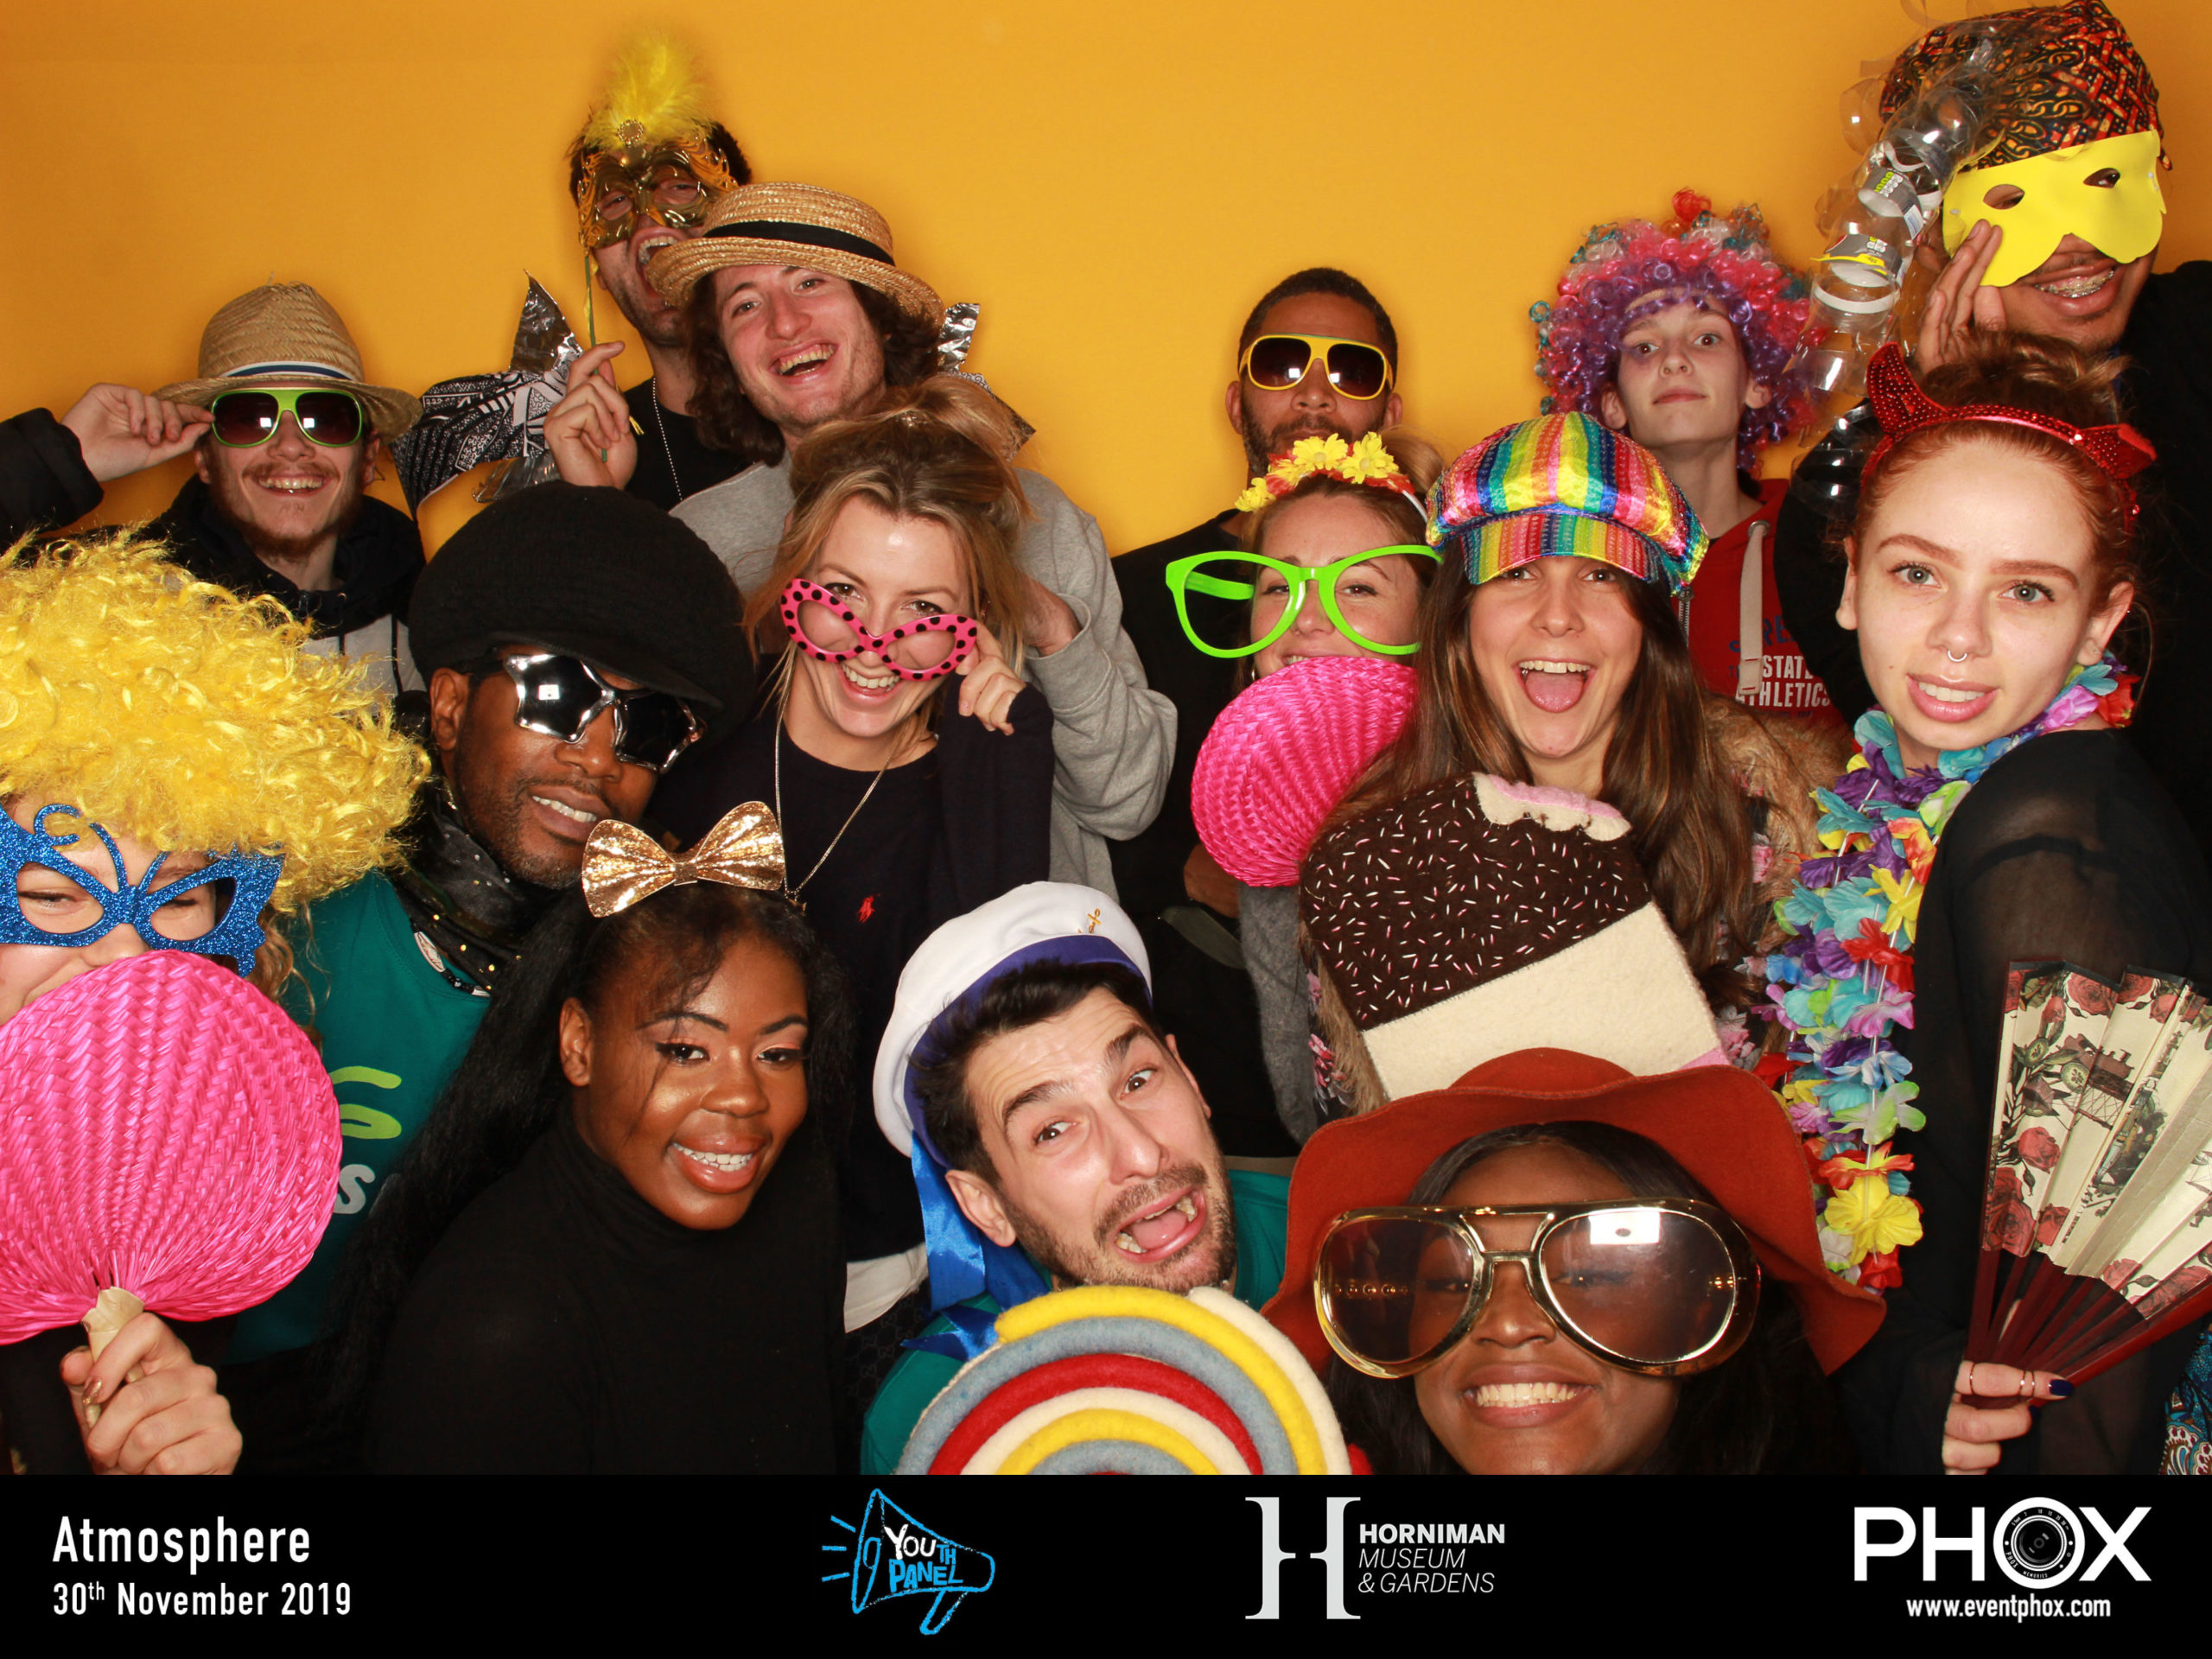 Members of the Kids in Museums Youth Panle pose in a photo booth with a yellow background with different props like big sunglasses, wigs and hats.